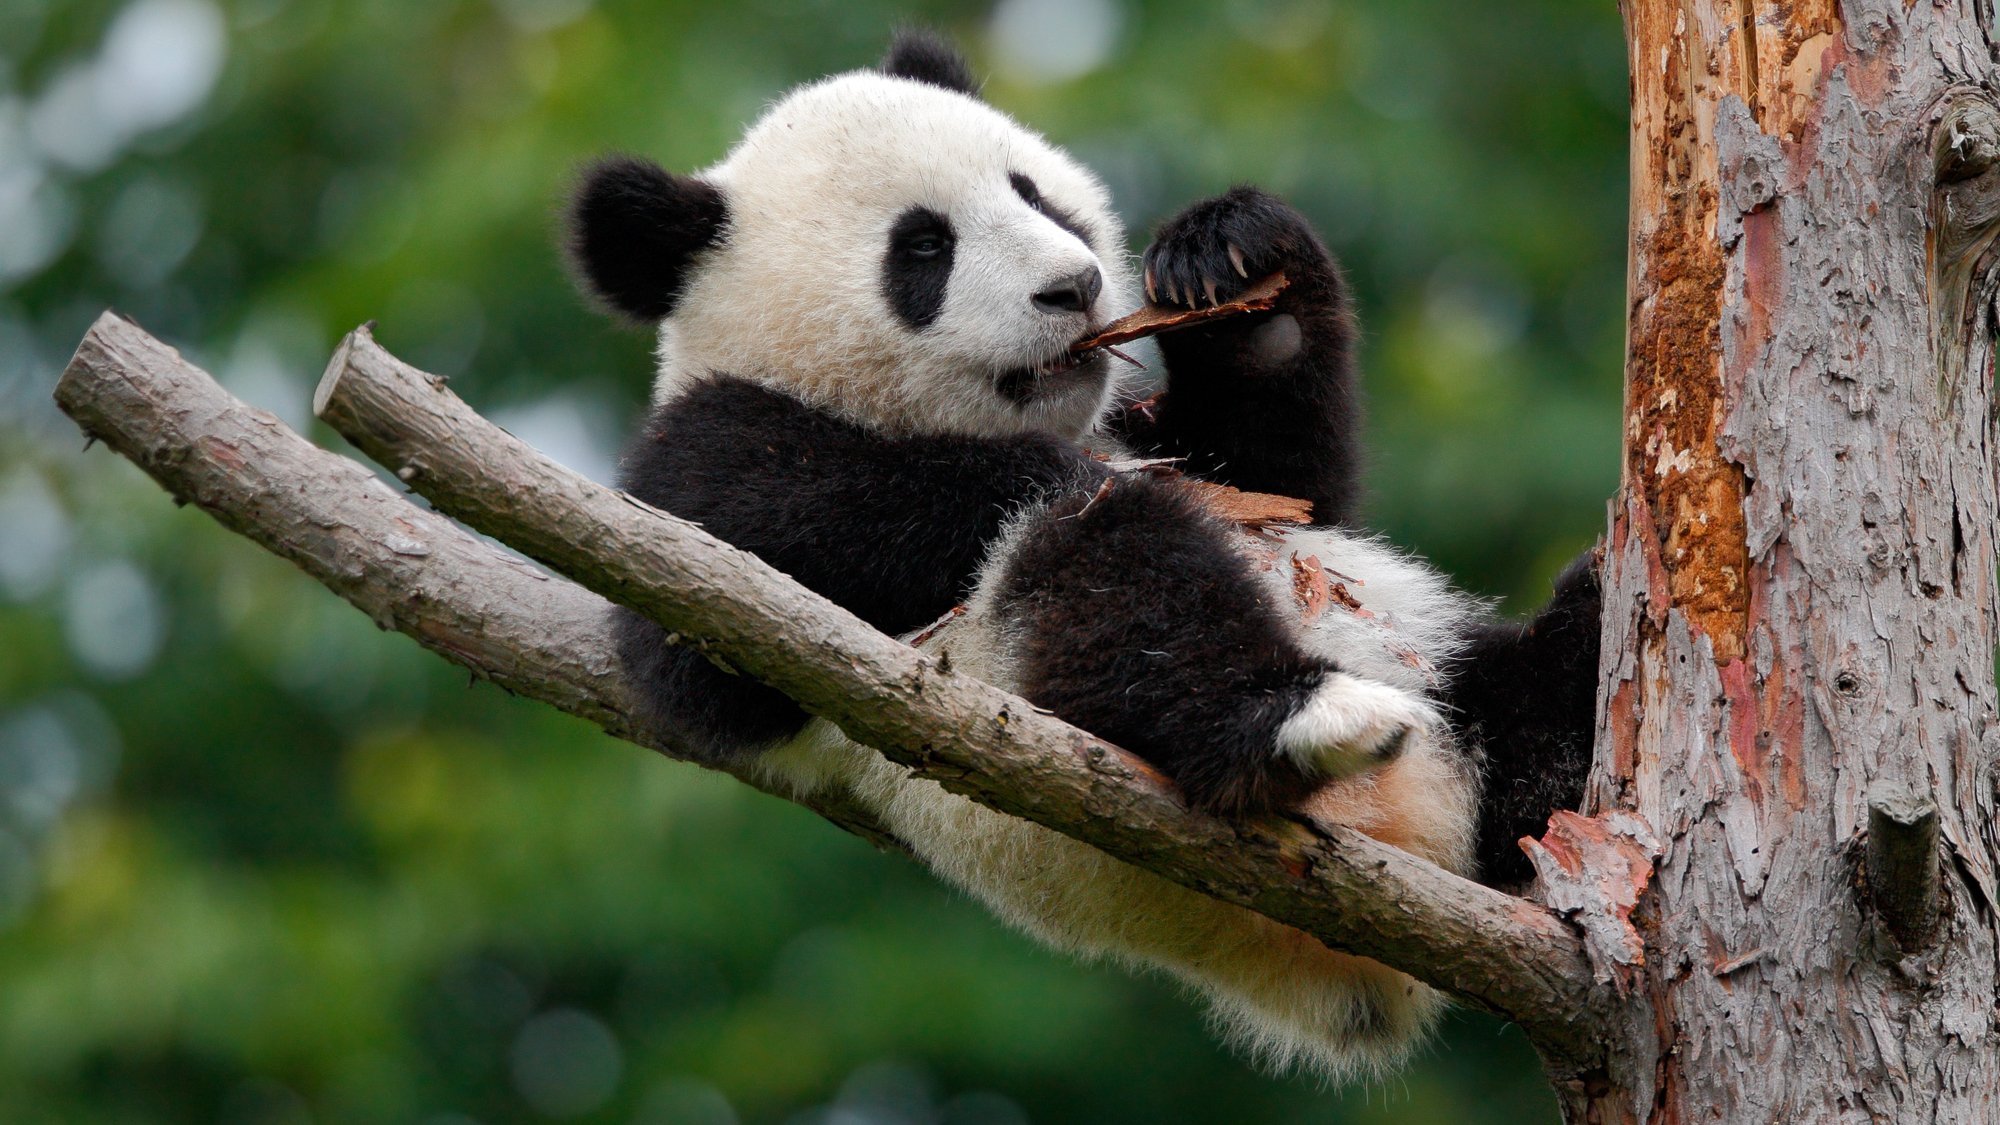 Young panda eating branch while sitting in tree.